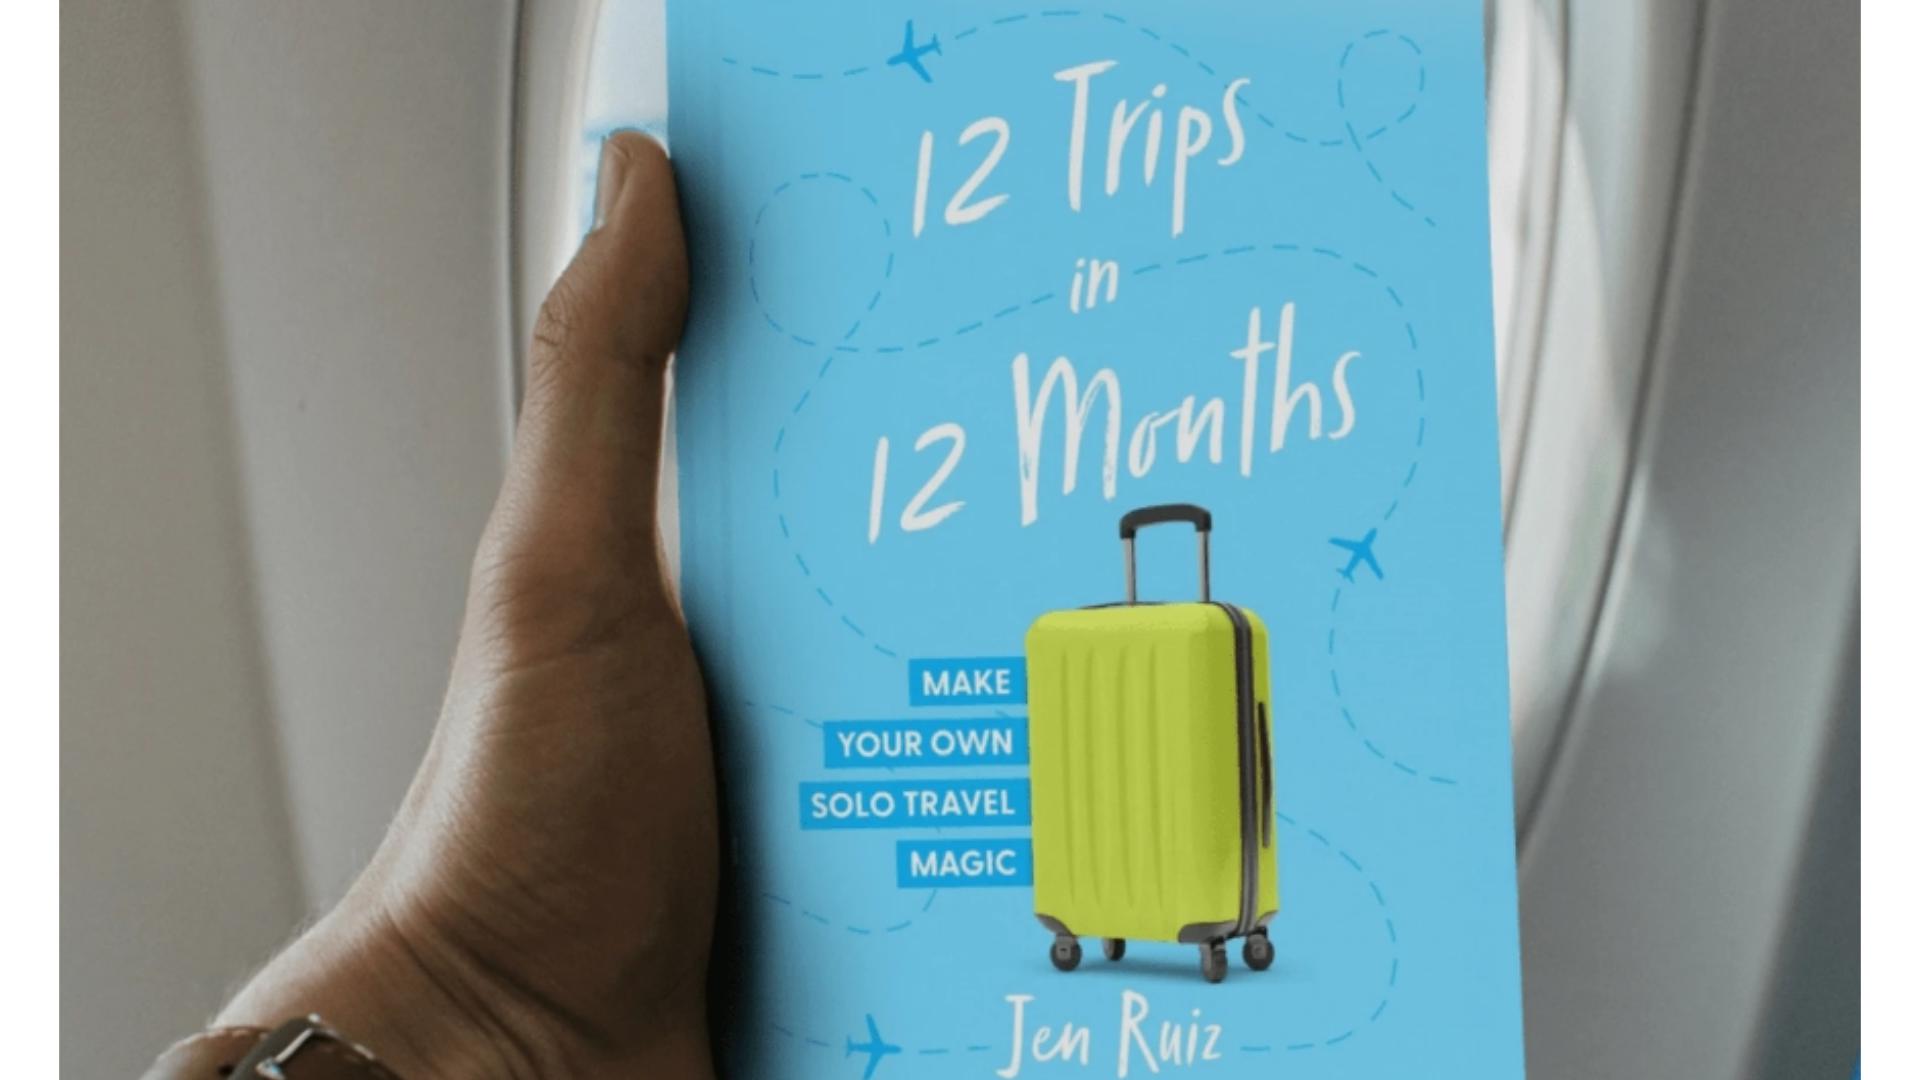 Jen Ruiz, travel expert and author of 12 Trips in 12 Days, shares insider tips for Summer adventures to stay out of debt.